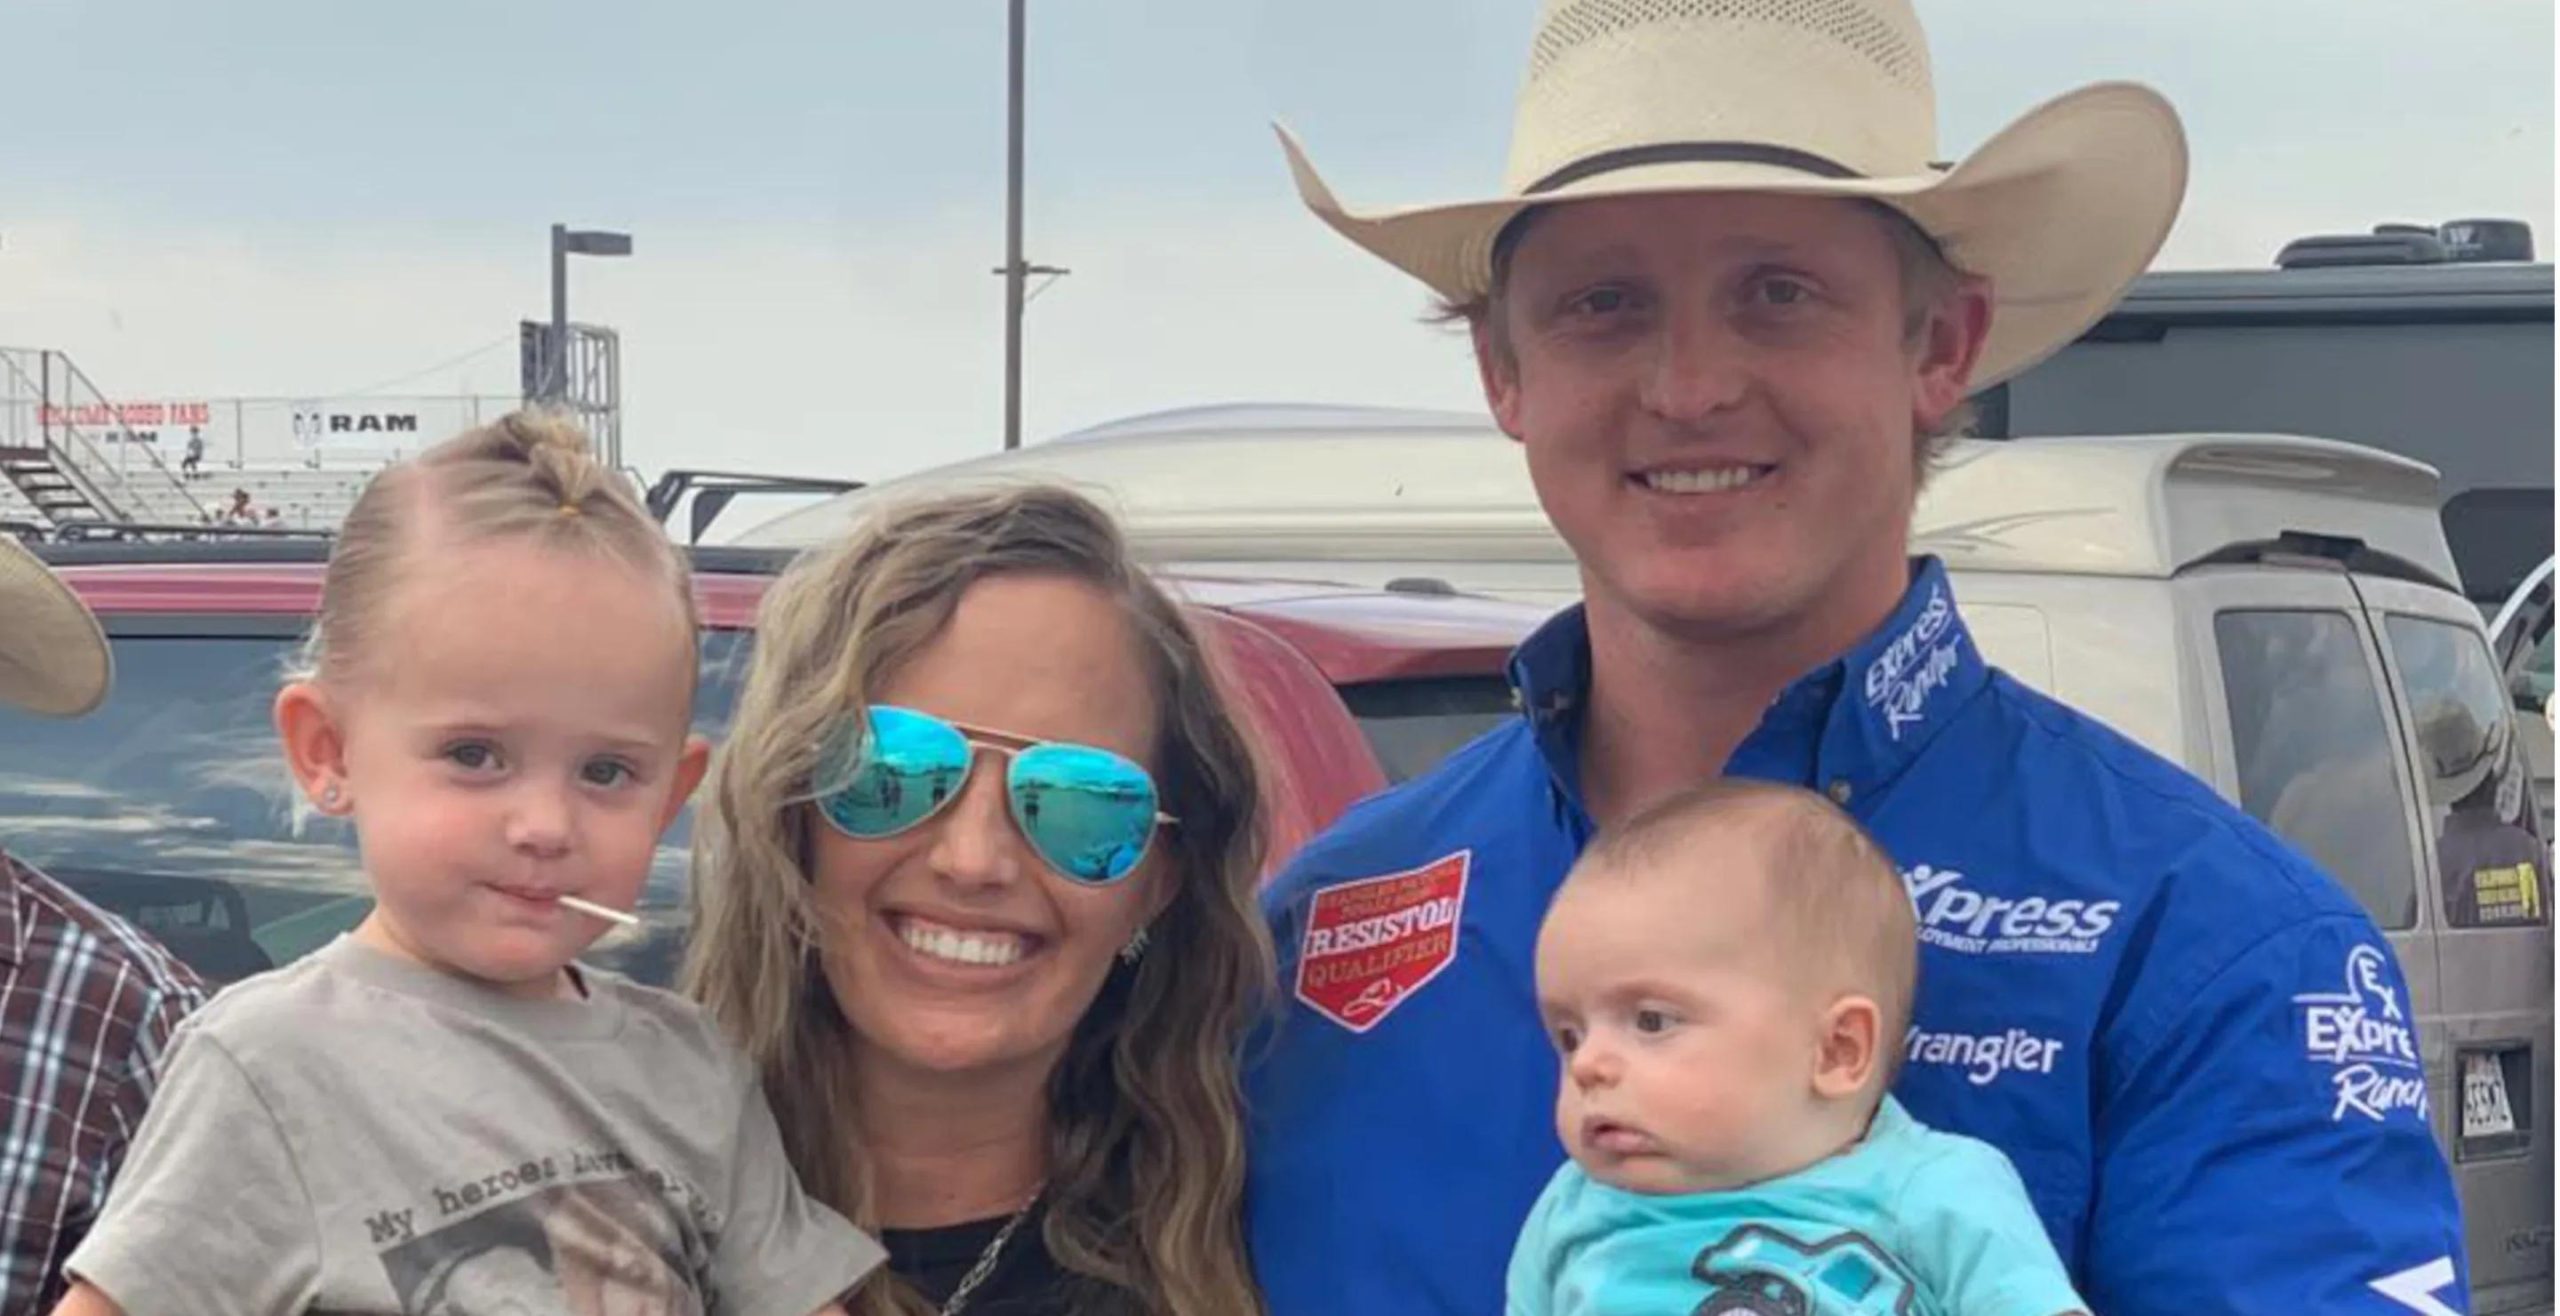 Spencer Wright’s 3-Year-Old Son Will Die As Family Makes Heartbreaking Decision To Remove Him From Life Support [Video]